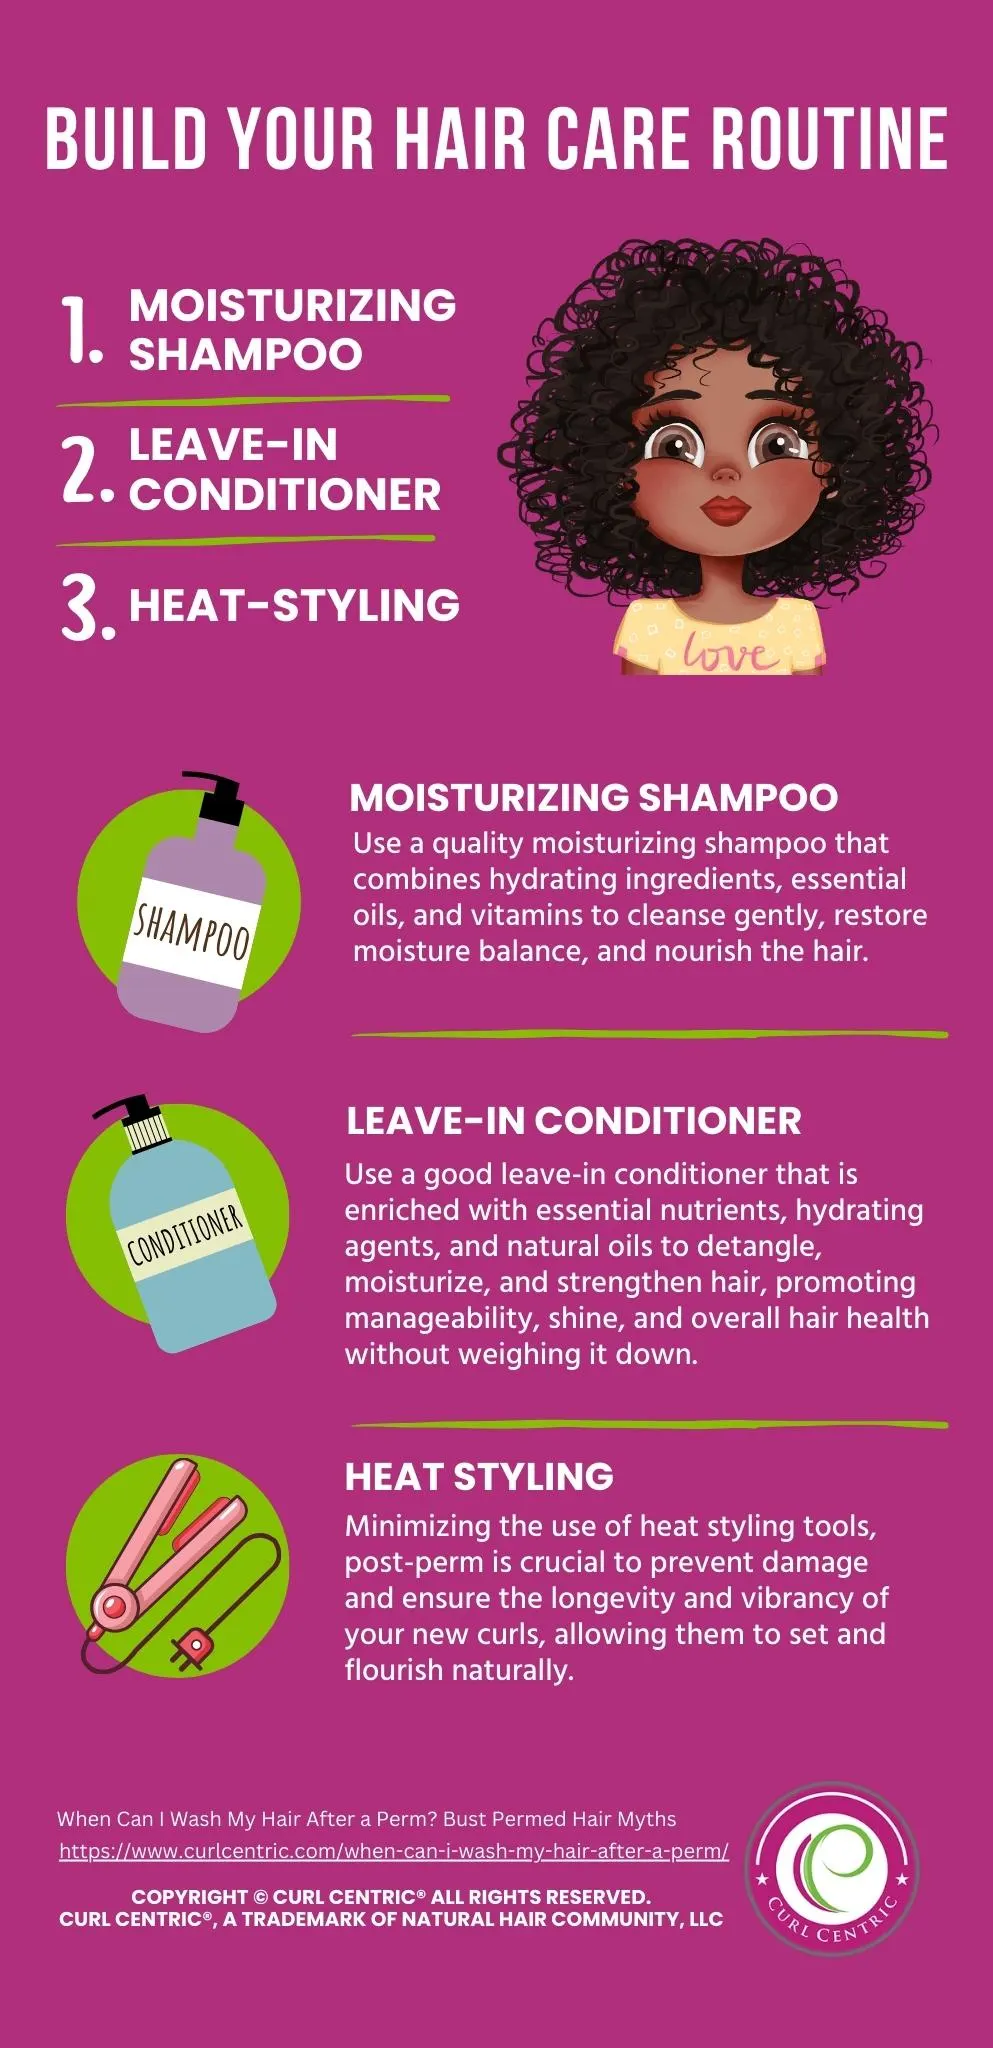 Build your curly hair care routine using this step-by-step guide - moisturizing shampoo, leave-in conditioner, and heat-styling